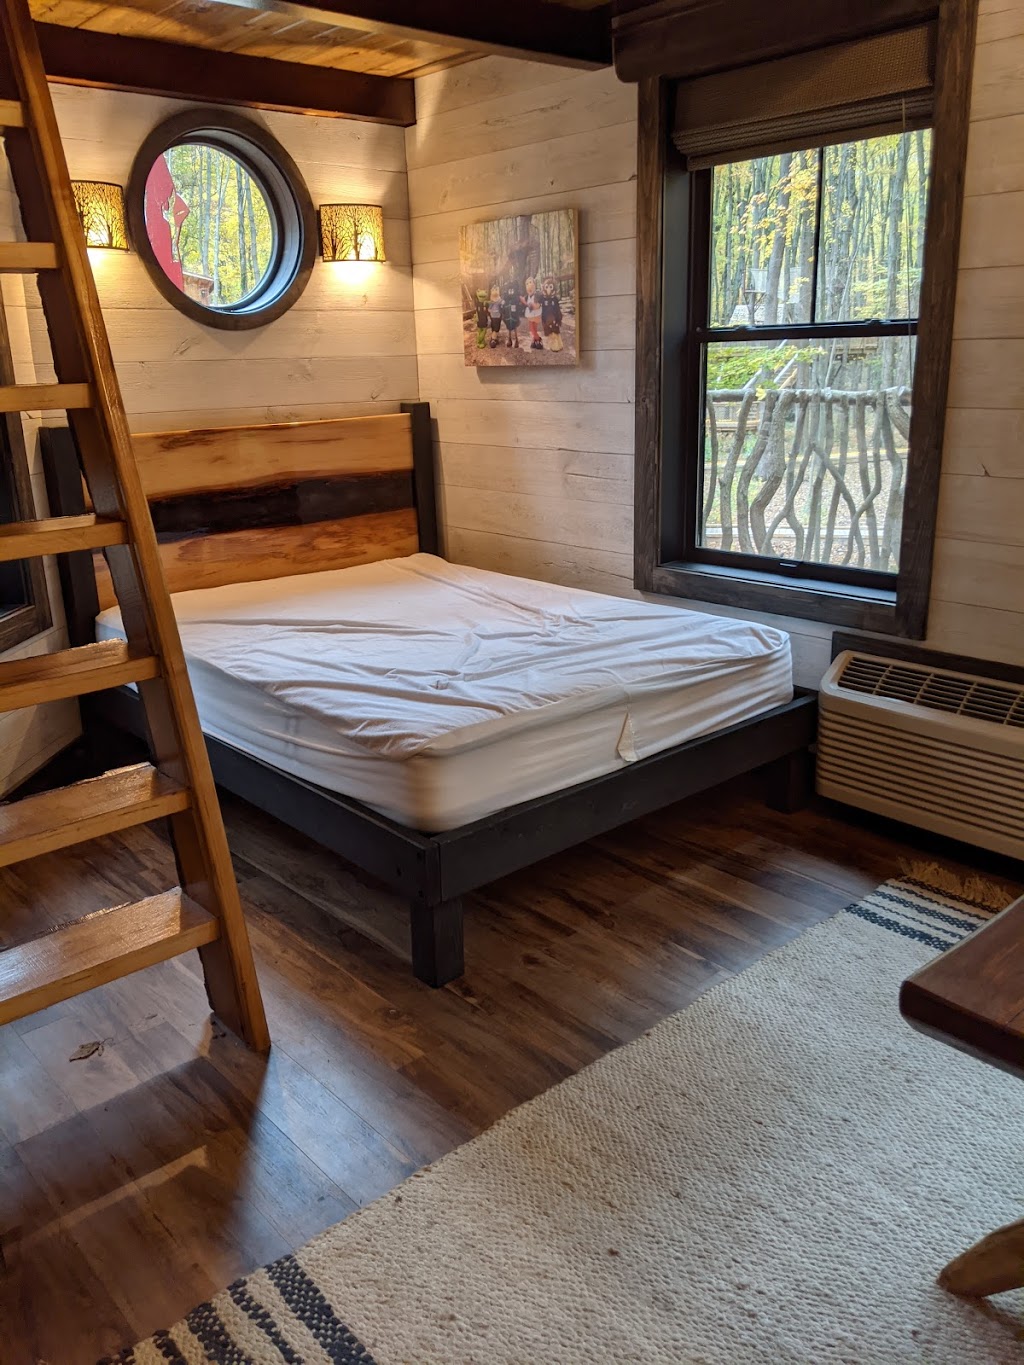 Cannaley Treehouse Village | 3520 Waterville Swanton Rd, Swanton, OH 43558 | Phone: (419) 407-9723